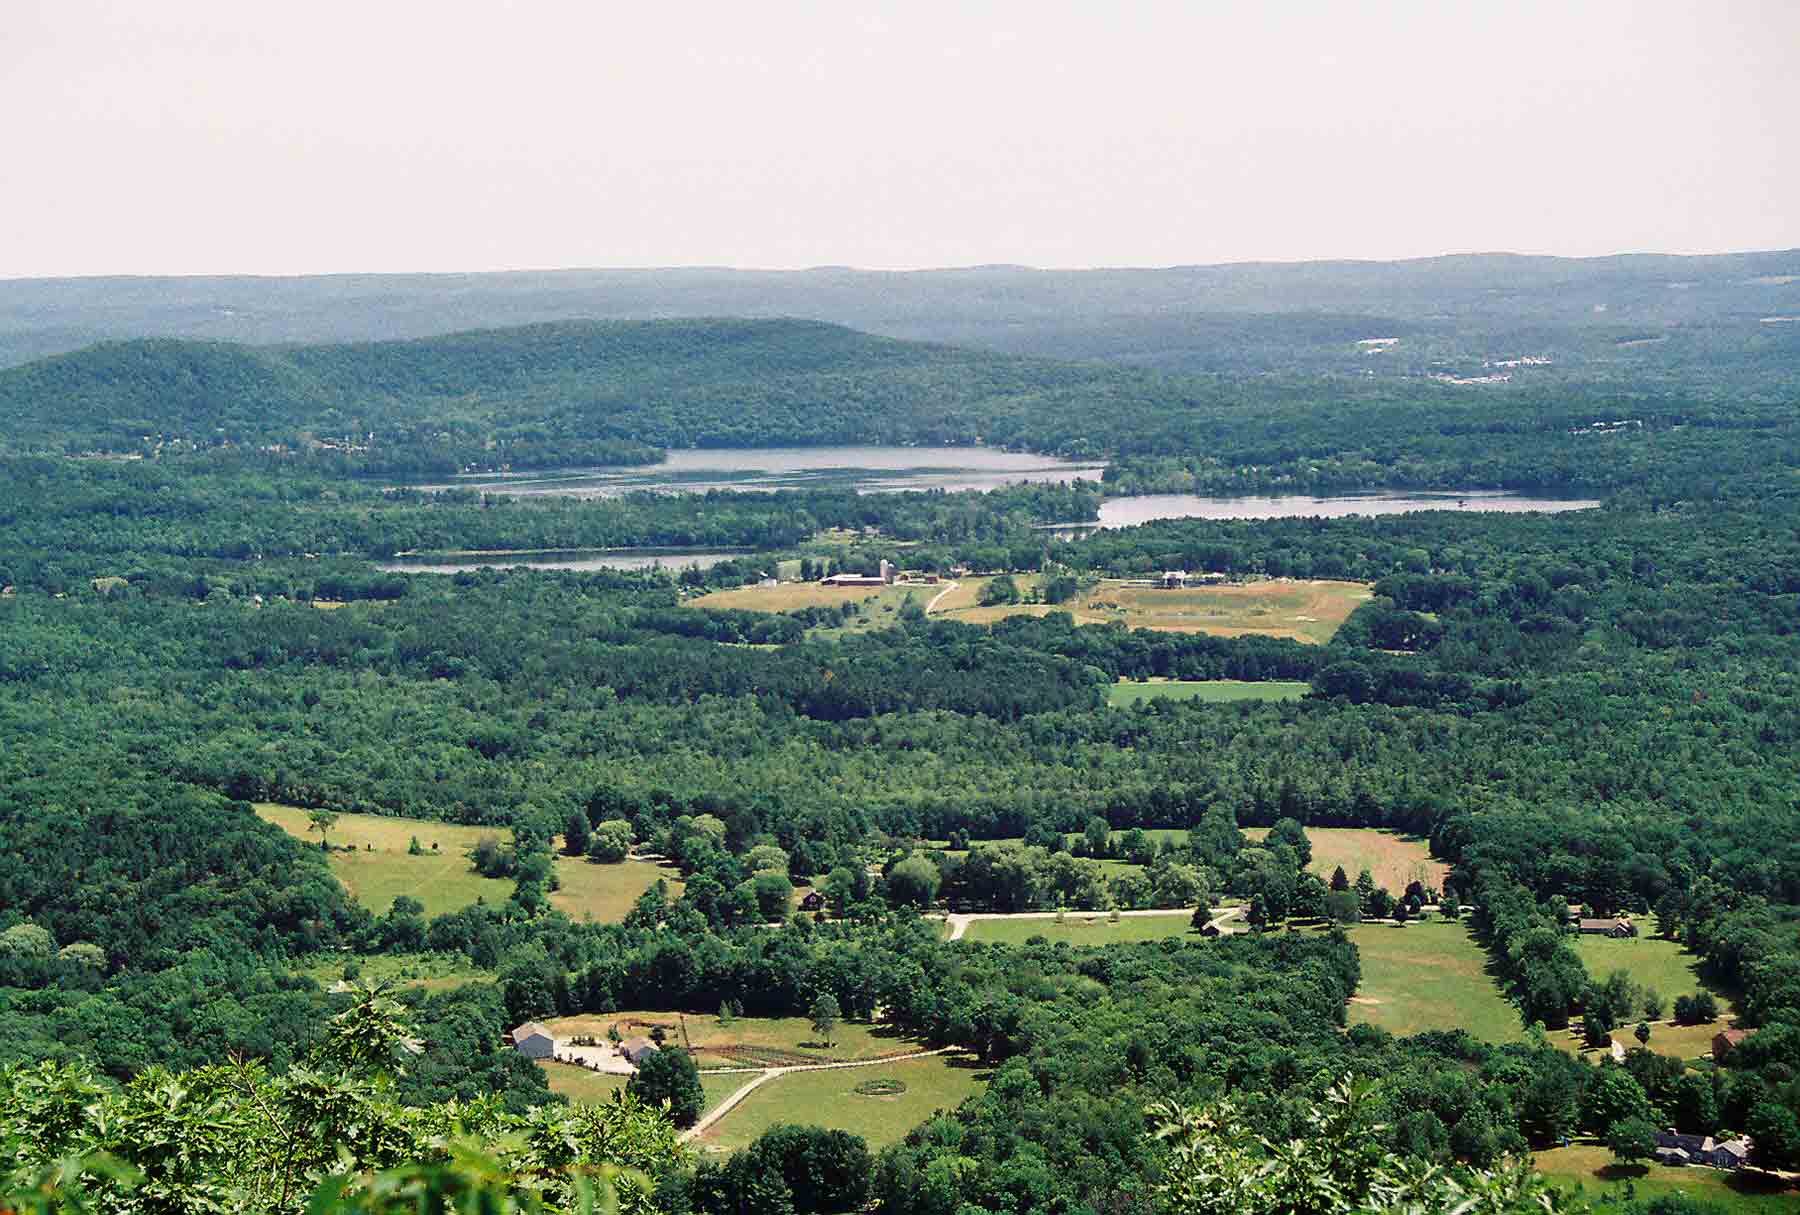 mm 4.7 - View east from ledge on main Lions Head summit.  The two lakes visible are Twin Lakes in Salisbury.  Courtesy dlcul@conncoll.edu